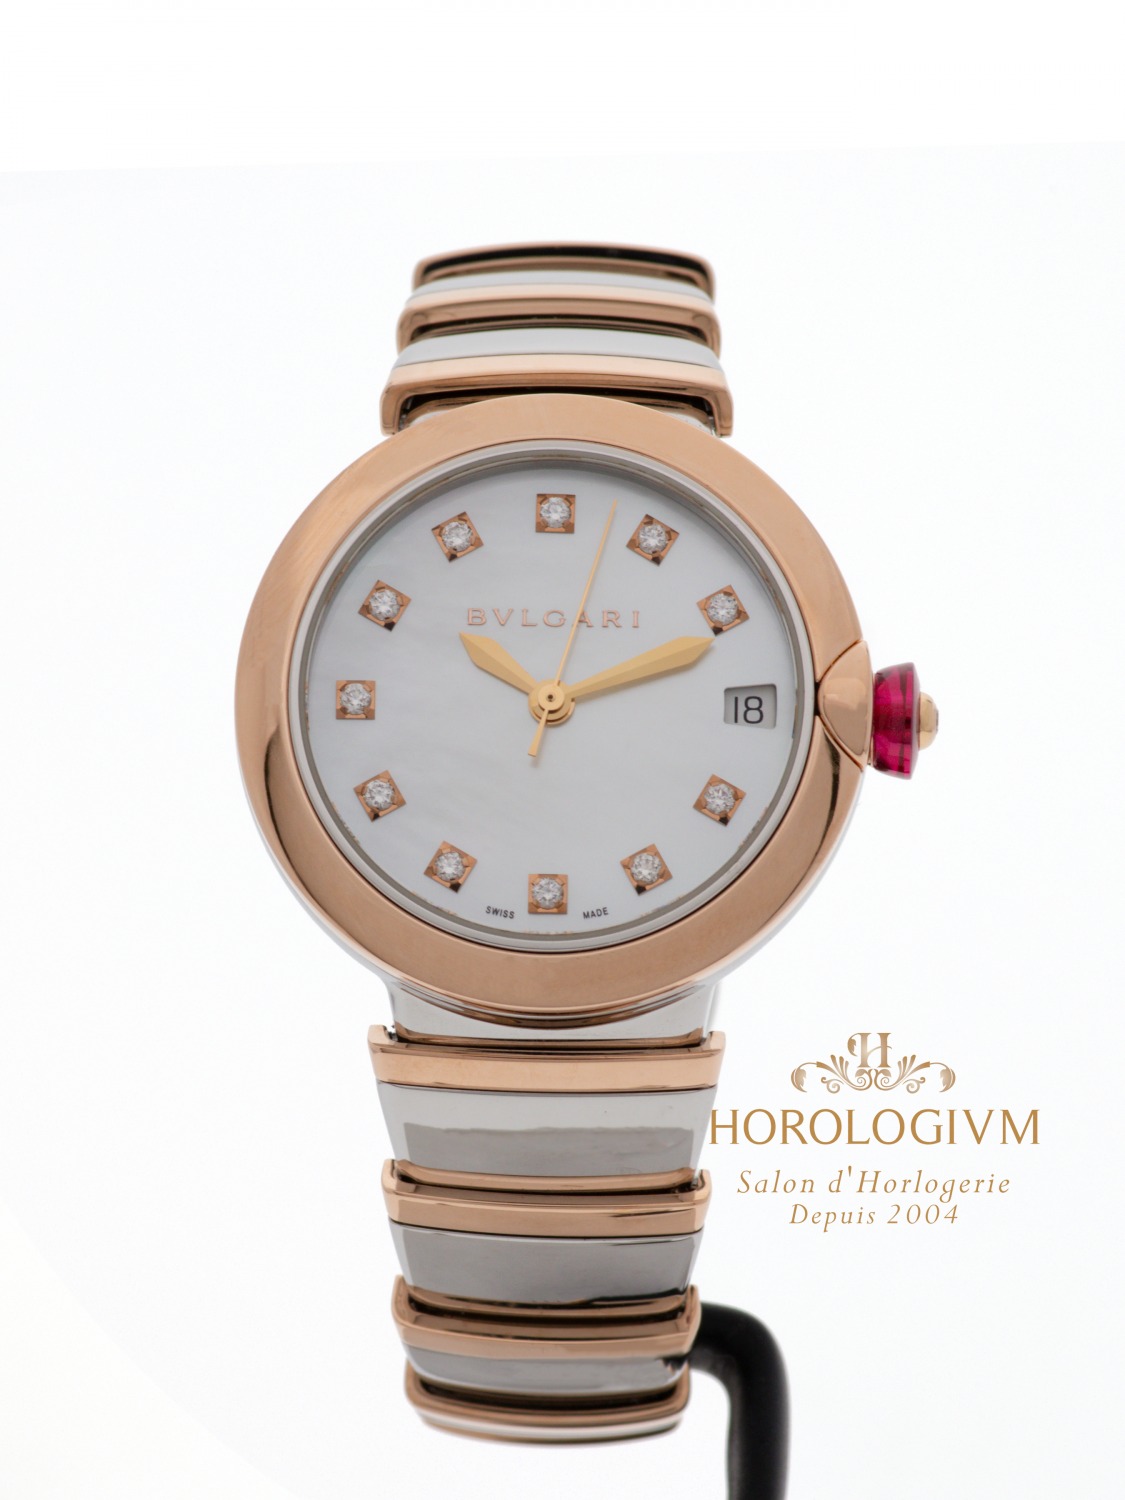 Bvlgari Lucea 33MM Two-Tone Ref. LUP33SG watch,  two-tone (bi-colored) silver (case)  and rose gold (bezel)